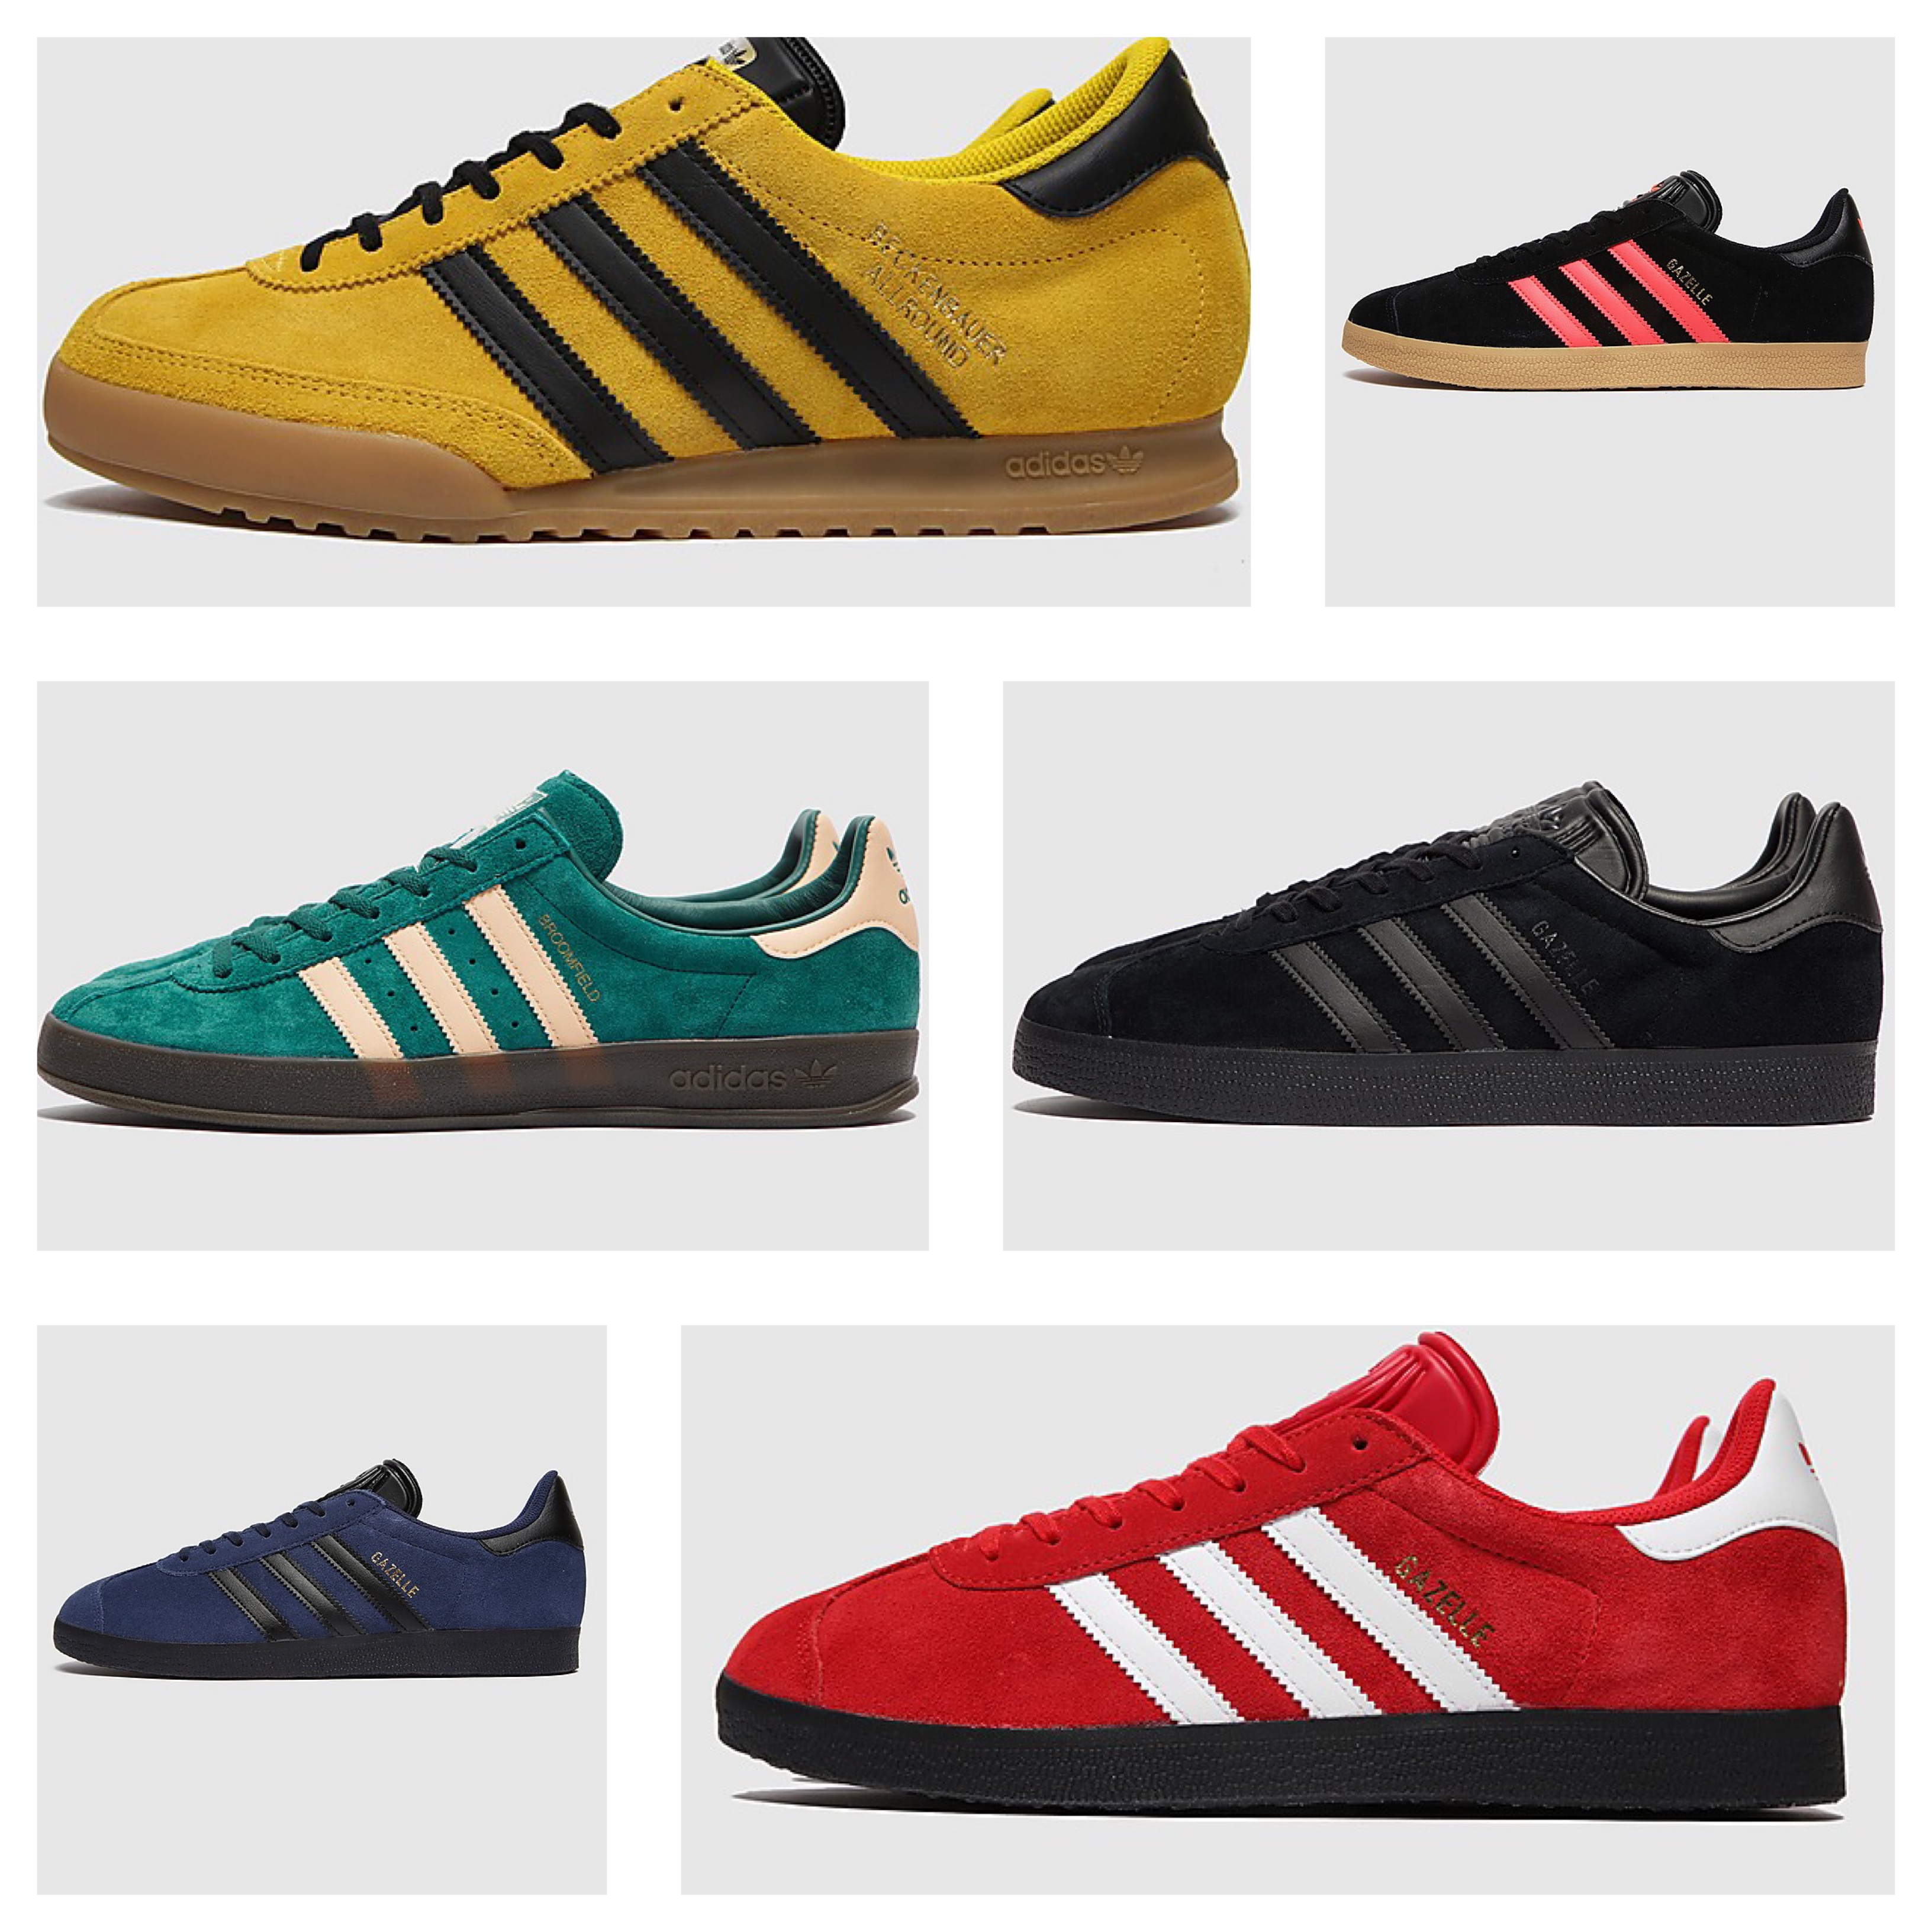 forma Bañera Maletín The Casuals Directory on Twitter: "#Ad Adidas Gazelle, Broomfield,  Beckenbauer, Jeans and more, all available in the terrace footwear section  over @ https://t.co/SwMkZjUJKx #adidas #sneakers #thecasualsdirectory  https://t.co/iltzNyhhqN" / Twitter